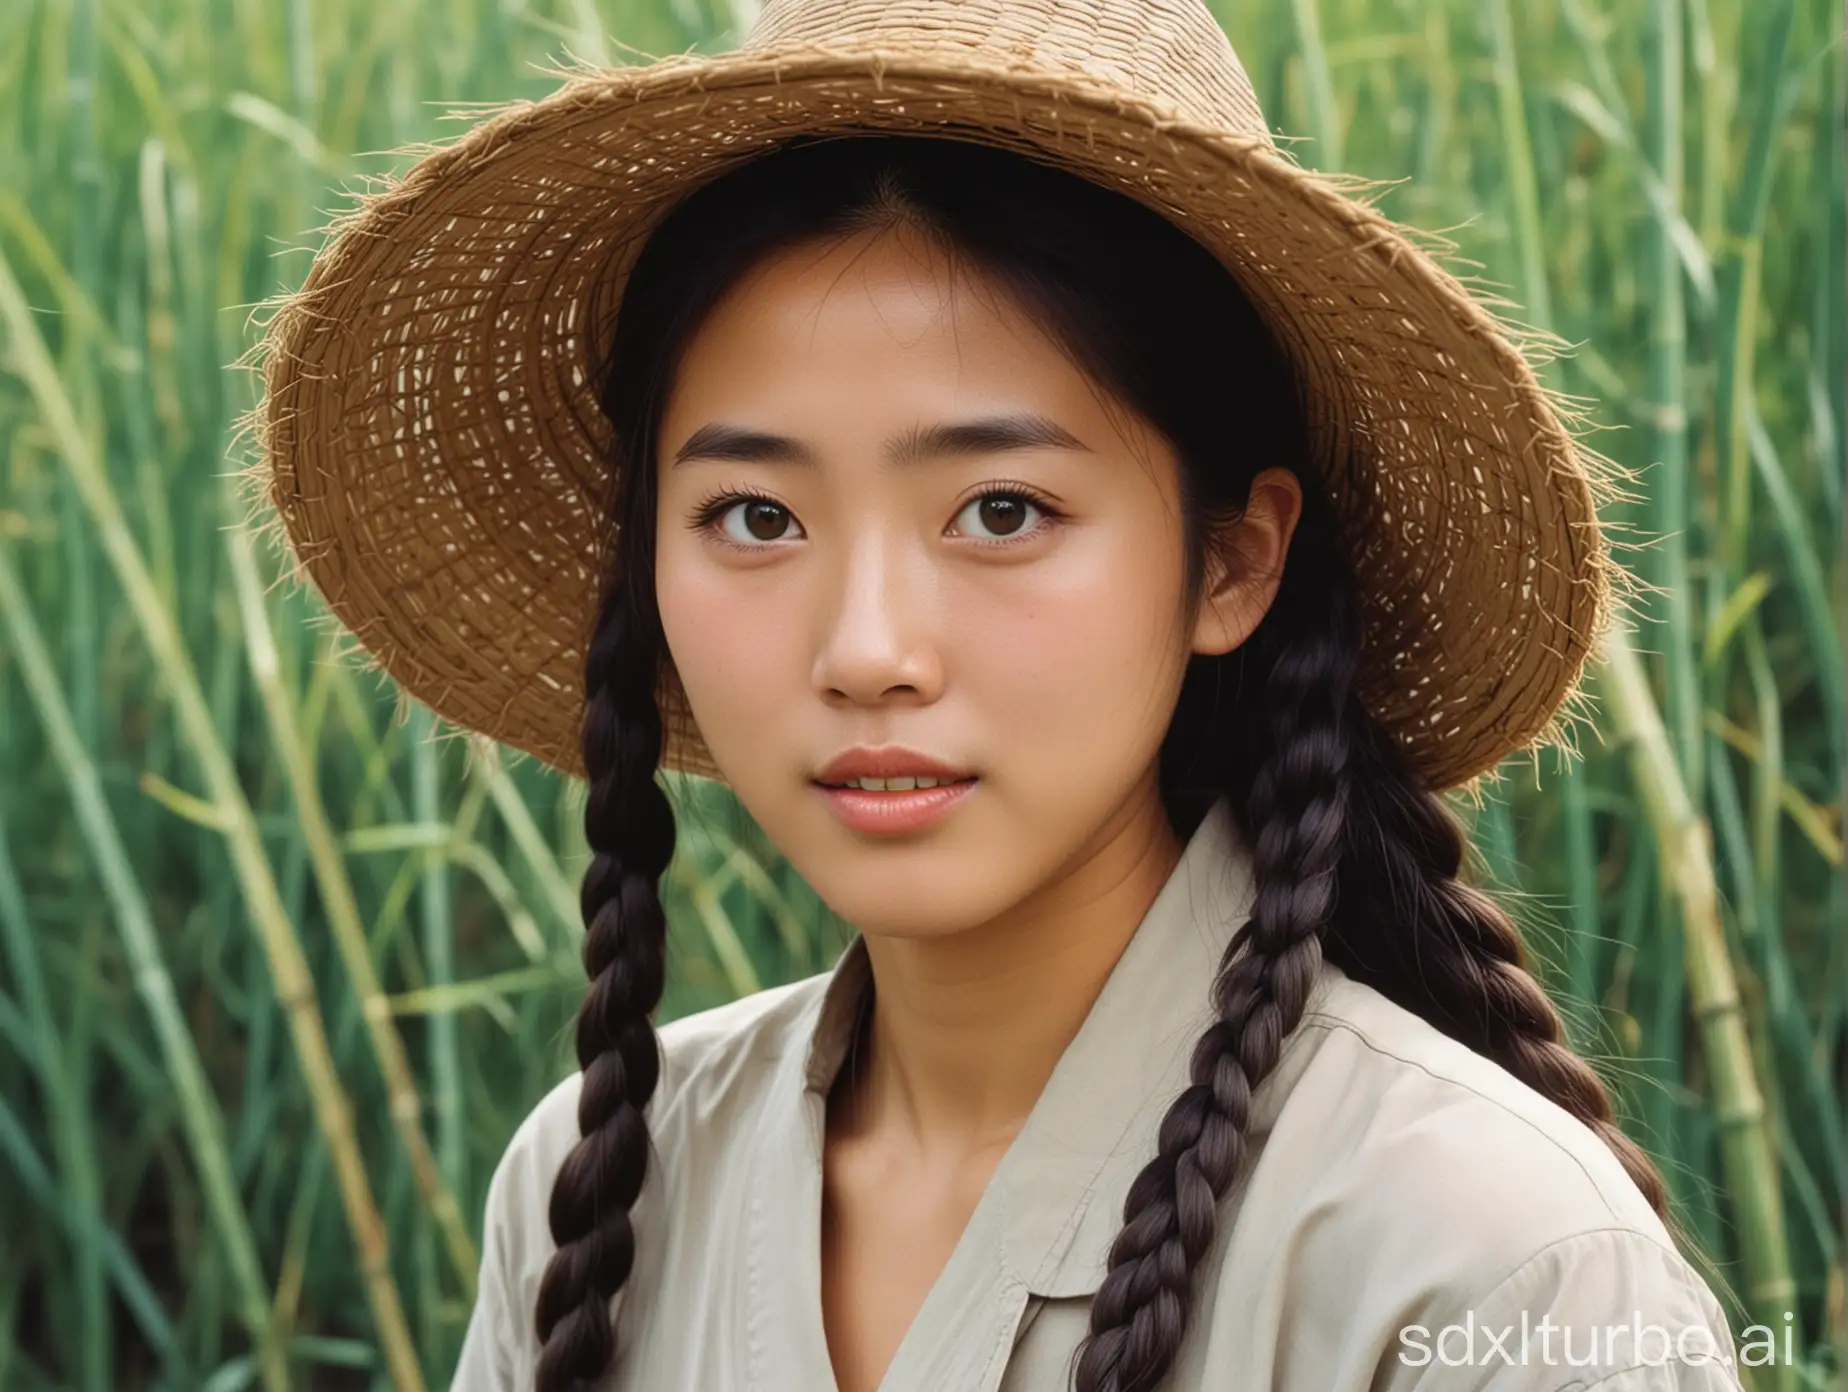 Rural-Chinese-Girl-in-the-1990s-Working-with-Braids-and-Bamboo-Hat